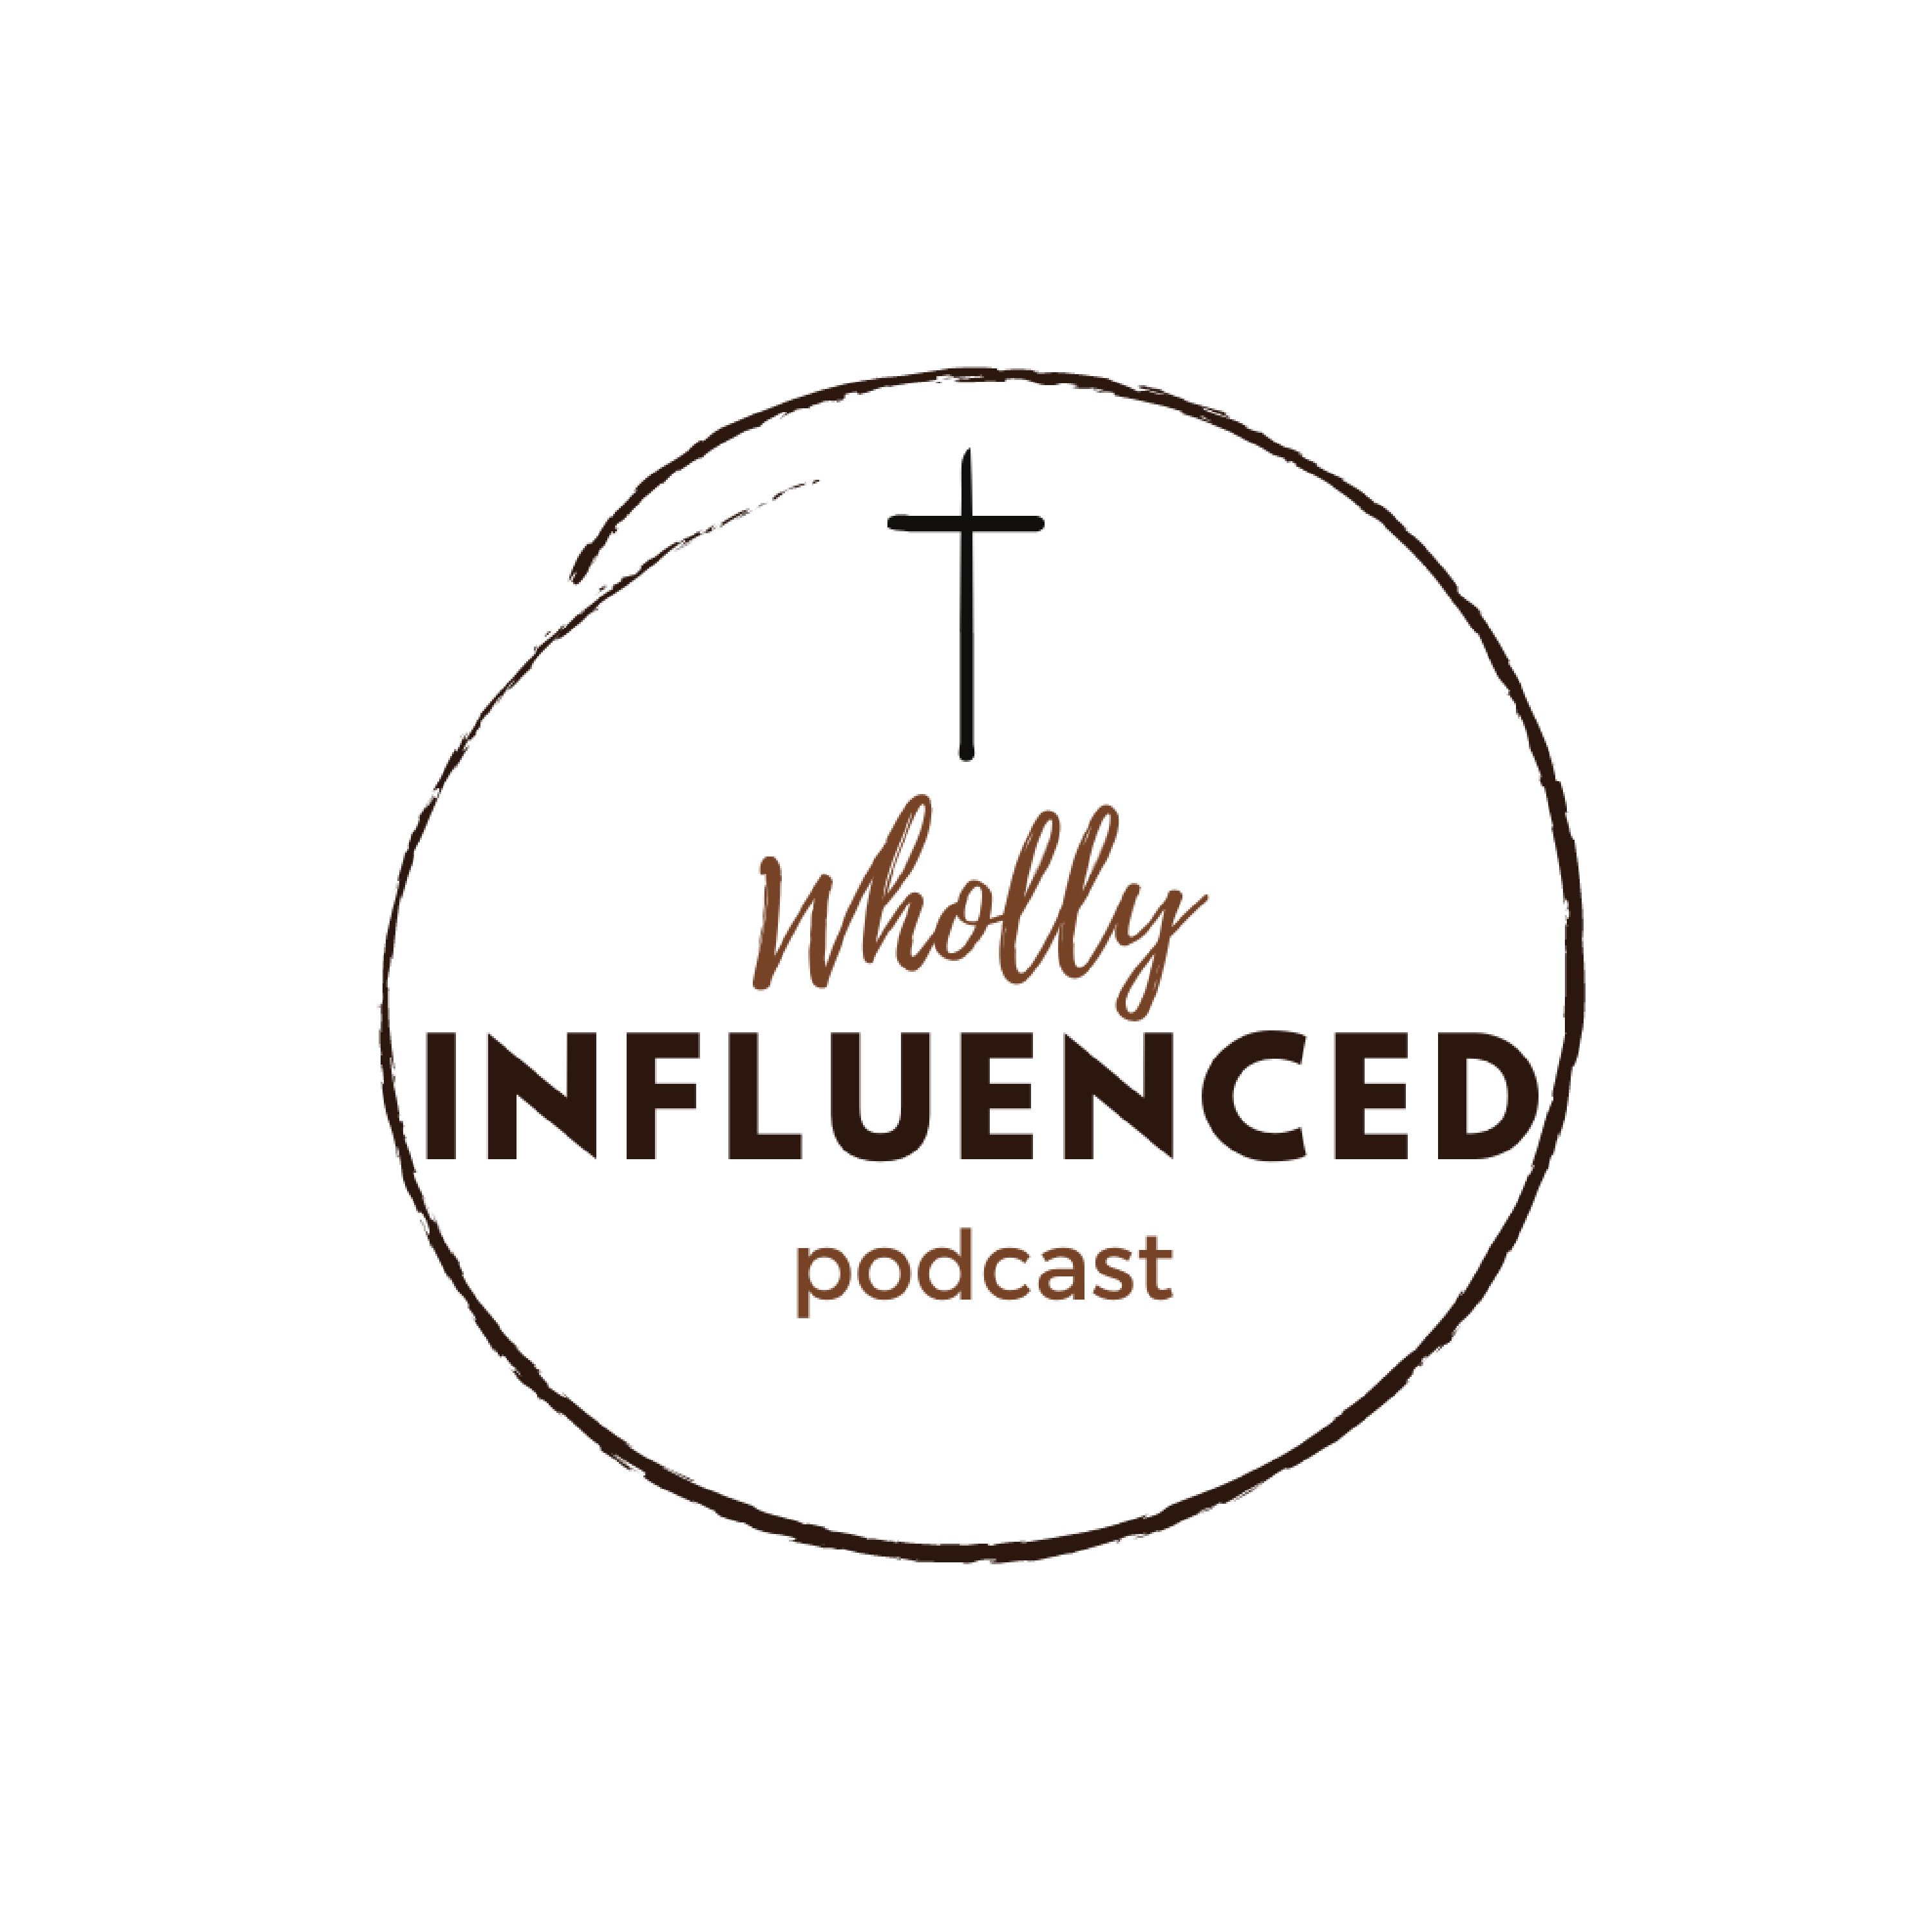 1 - Introduction to the Wholly Influenced Podcast